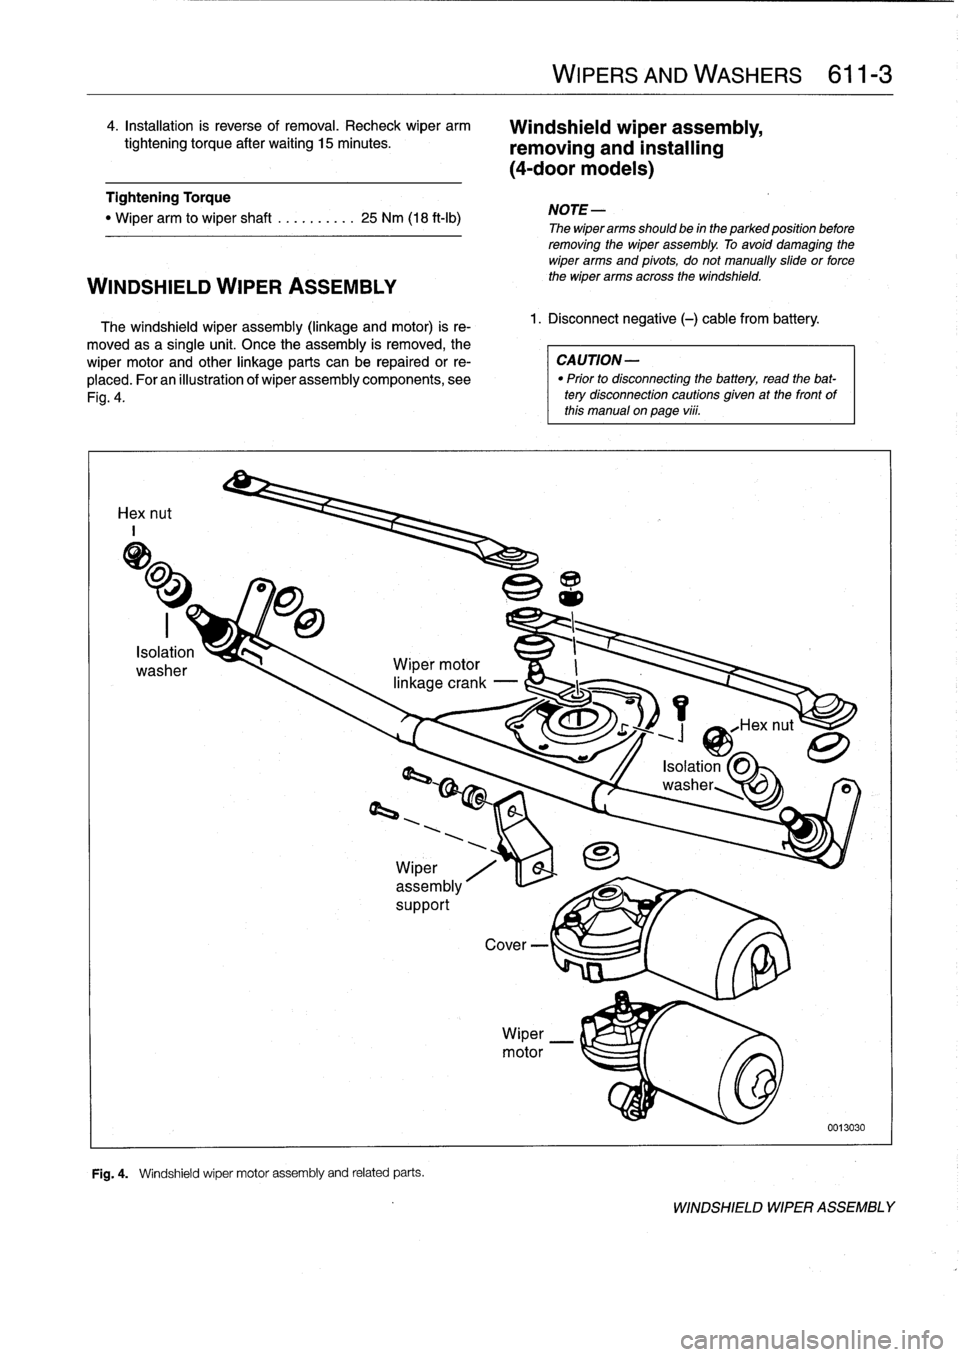 BMW M3 1993 E36 Workshop Manual 
4
.
Installation
is
reverse
of
removal
.
Recheck
wiper
arm

tightening
torque
after
waiting
15minutes
.

Tightening
Torque

"
Wiper
arm
to
wiper
shaft
..........
25
Nm
(18
ft-Ib)

WINDSHIELD
WIPER
AS